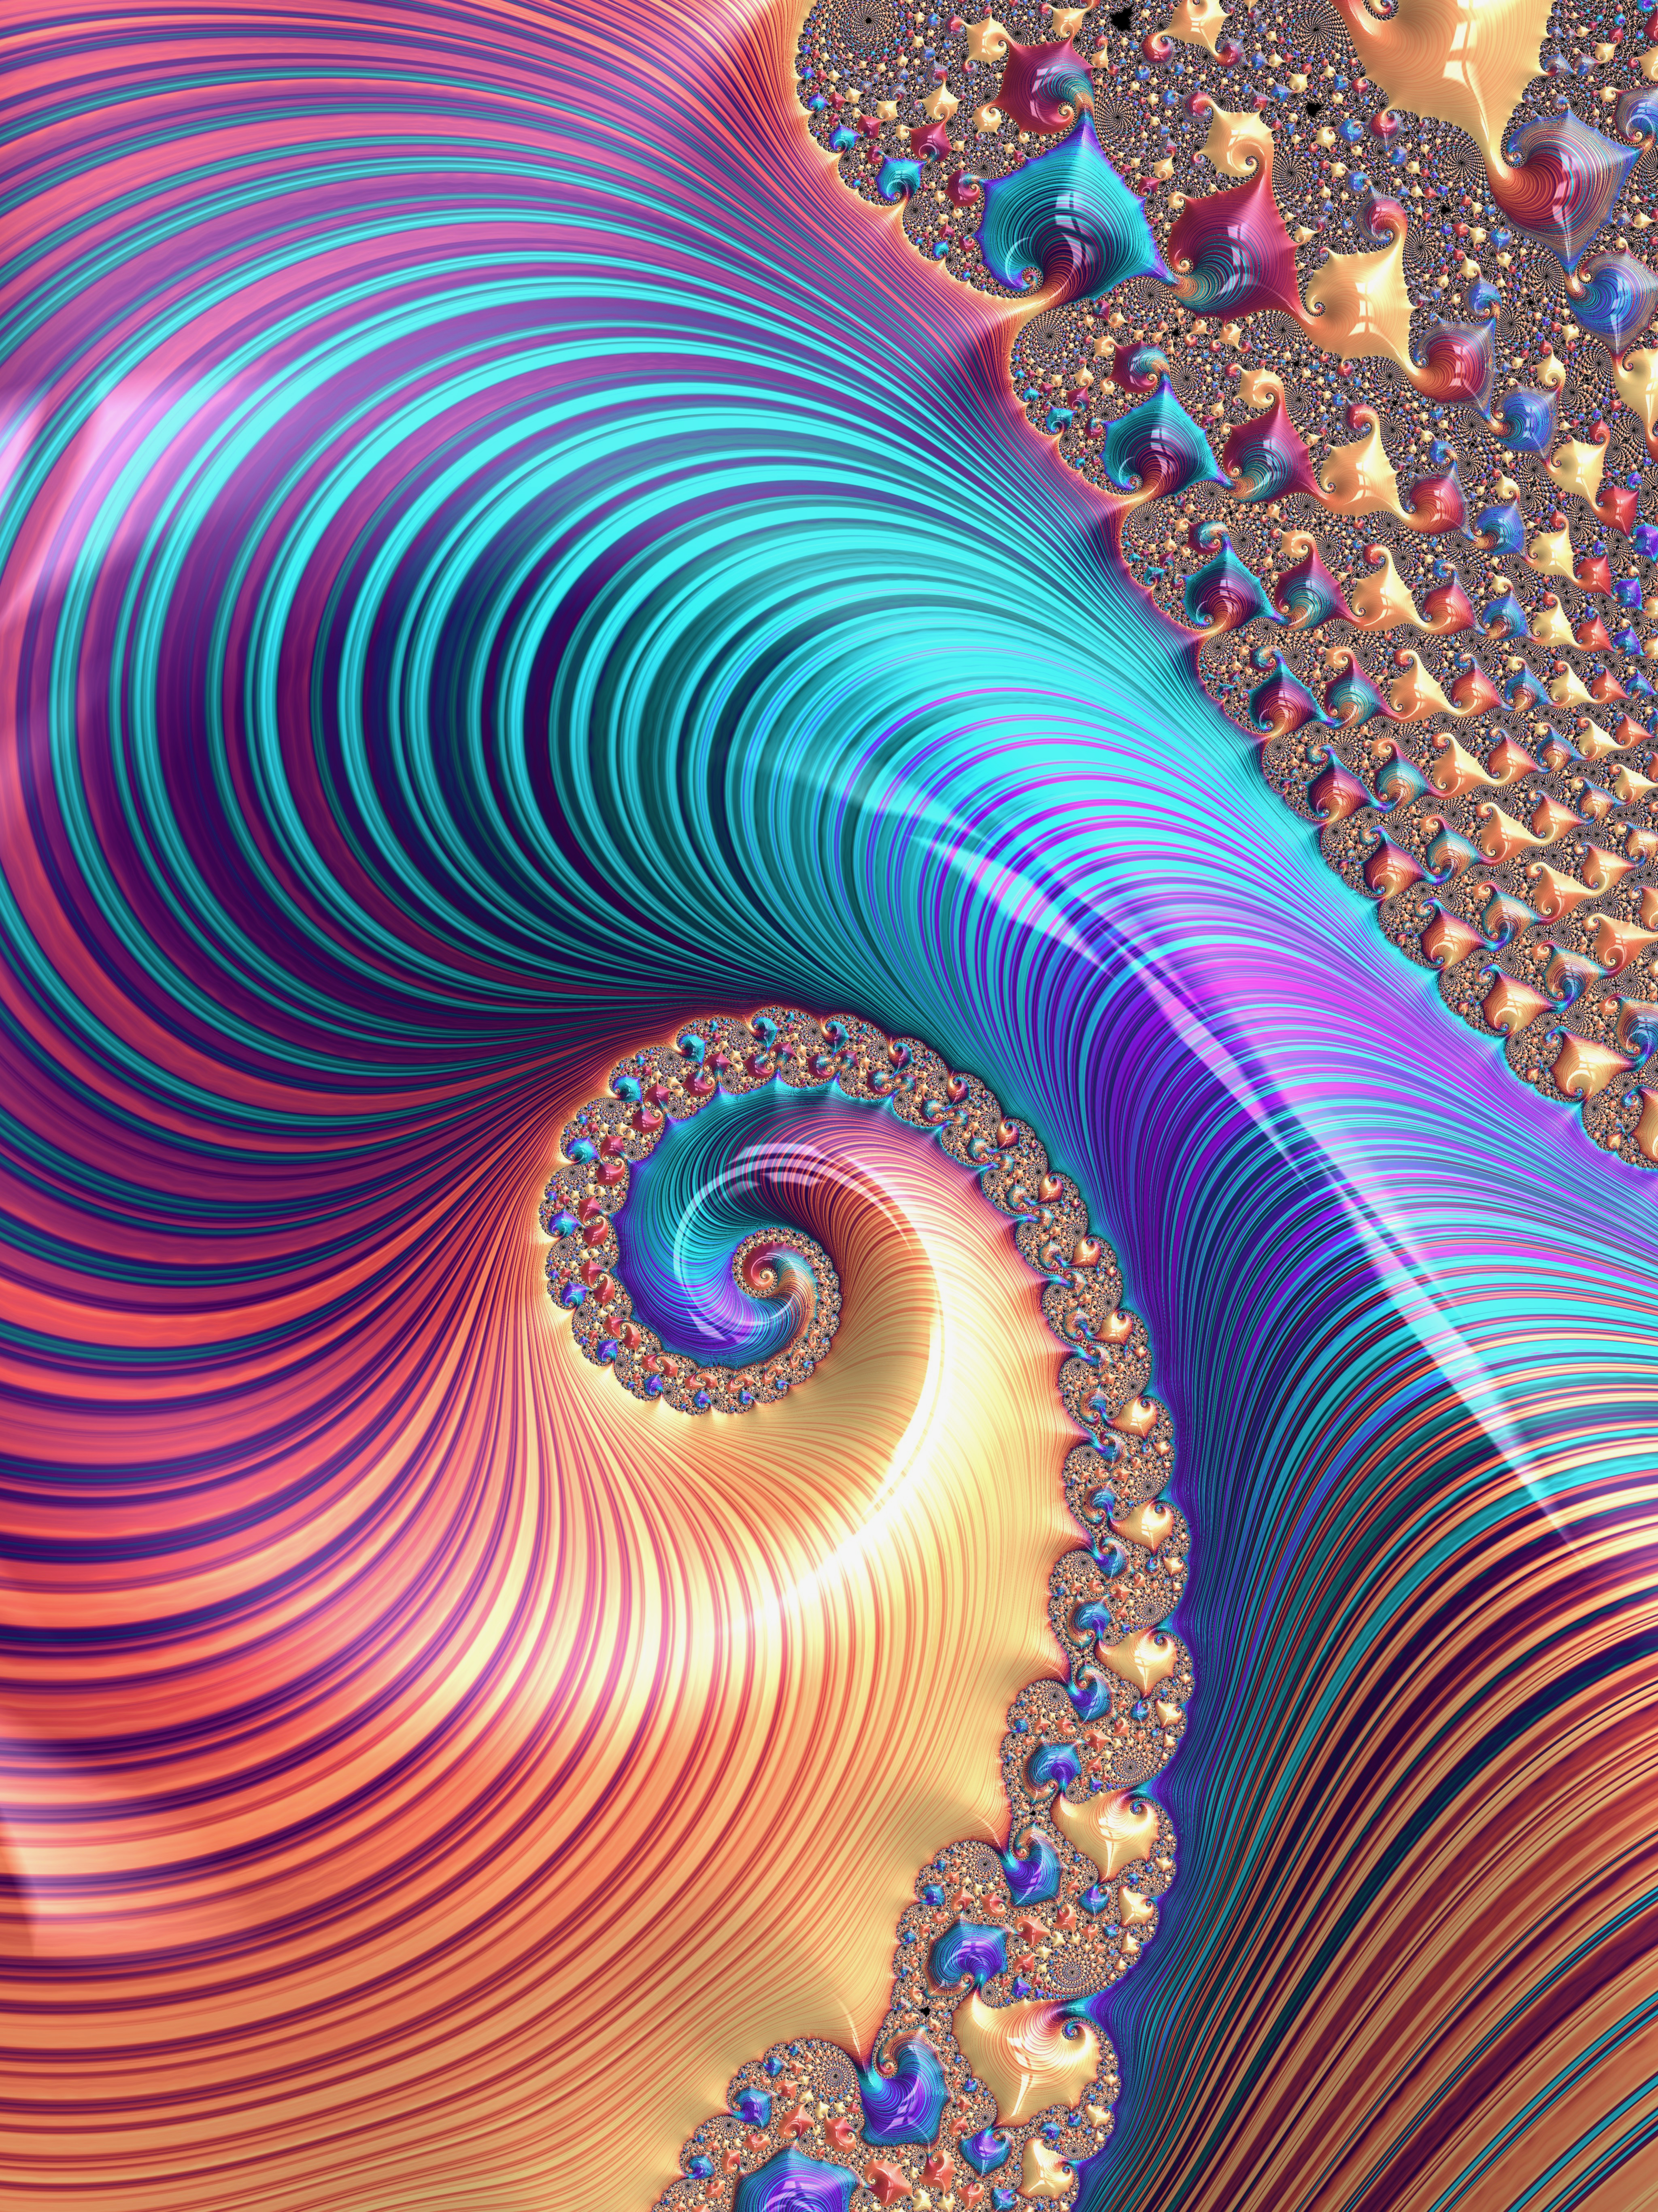 abstract, multicolored, motley, pattern, fractal, spiral, twisting, twist iphone wallpaper